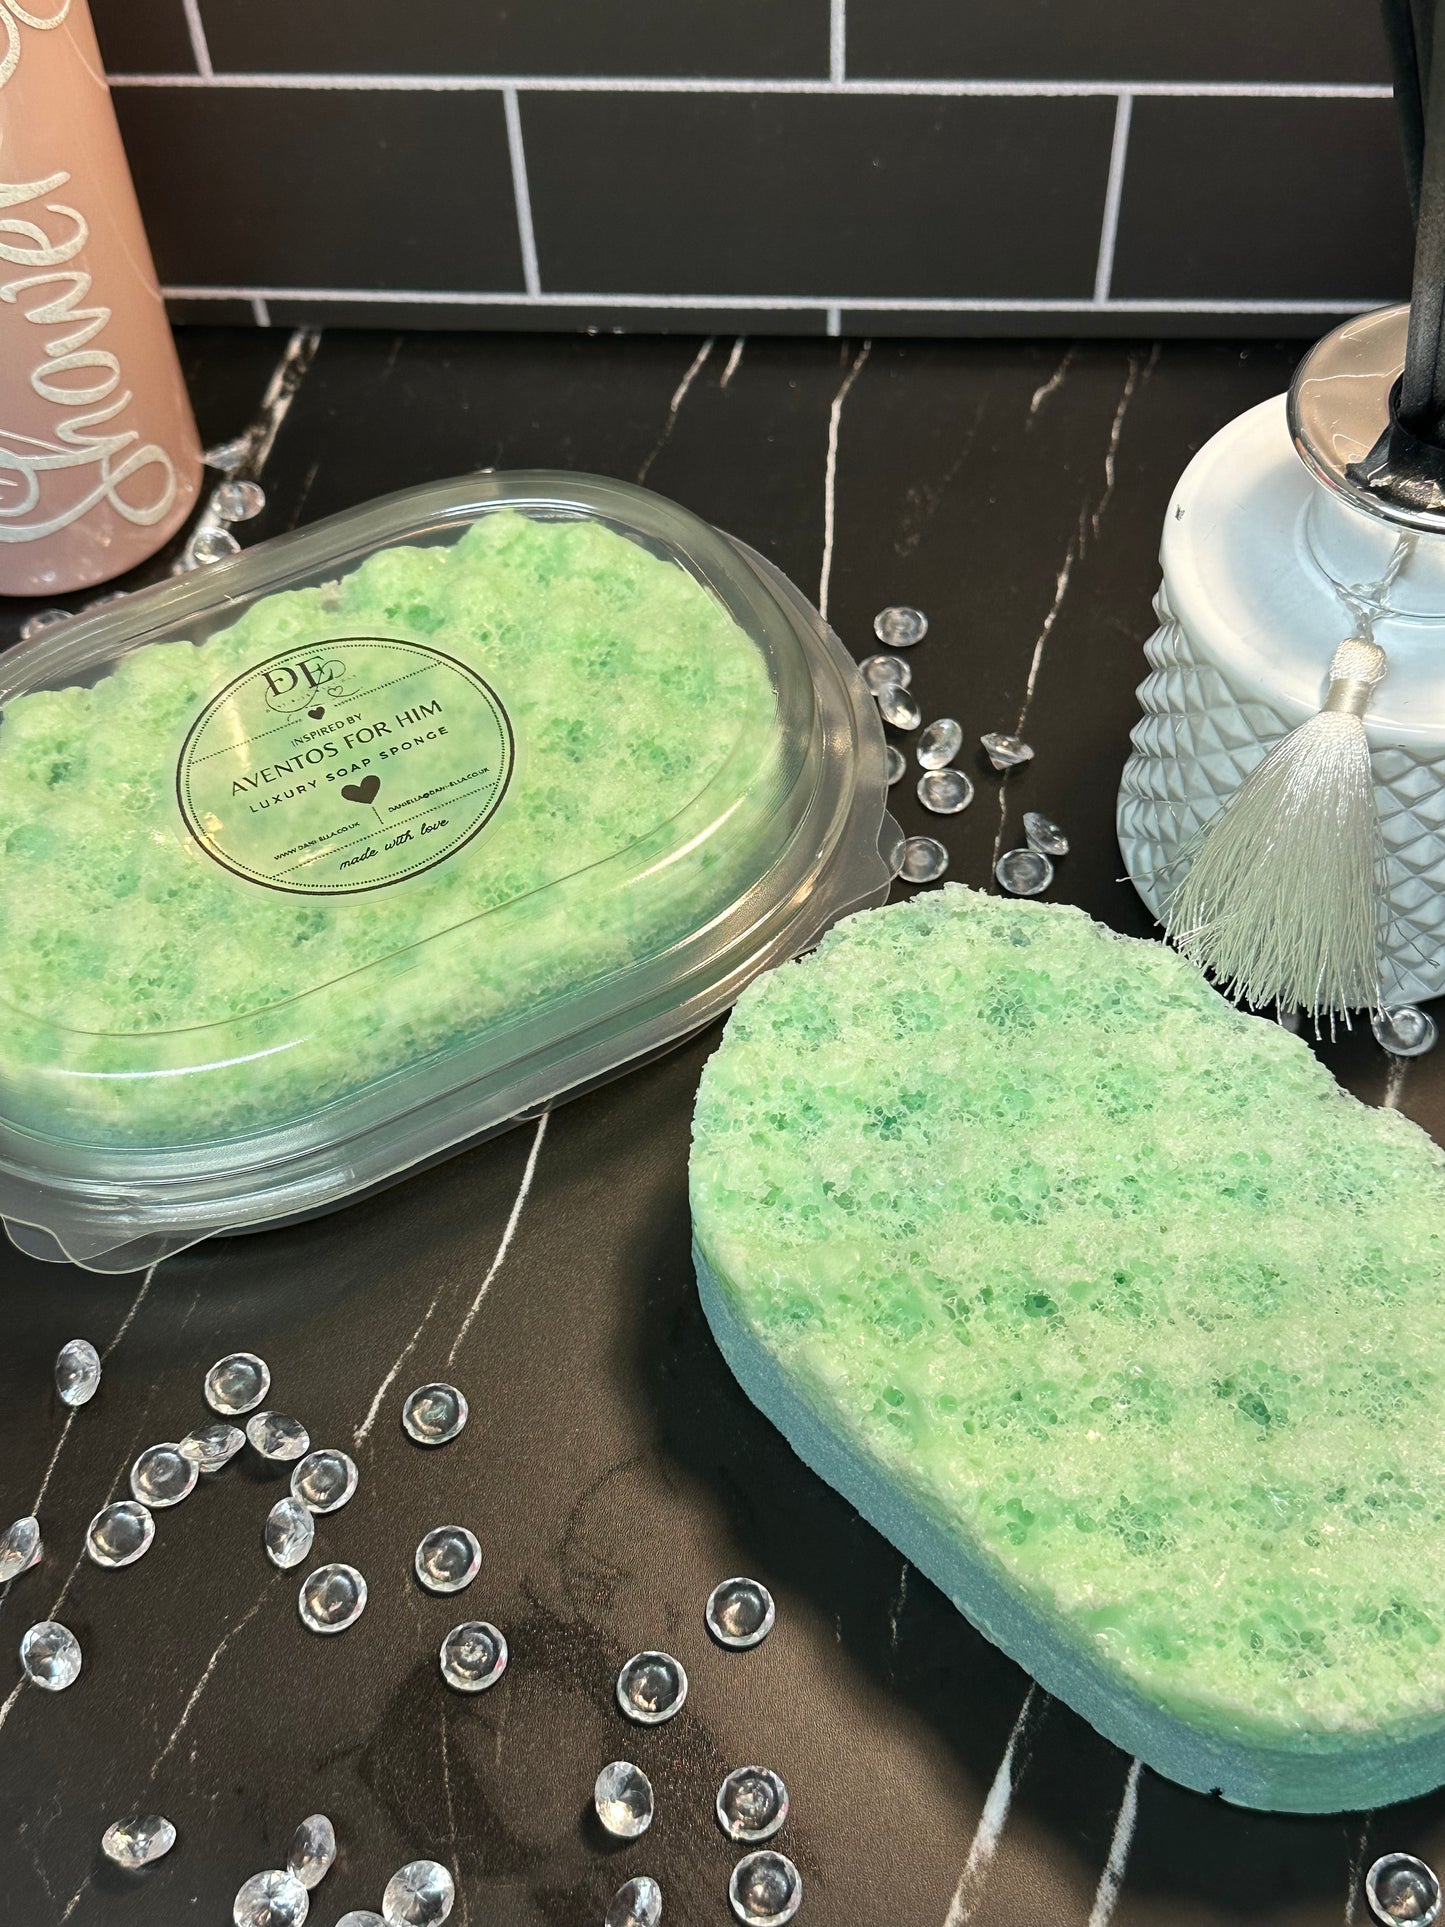 BATH & Body Exfoliating Smooth Luxury Soap Sponge - Inspired by Aventos for Him